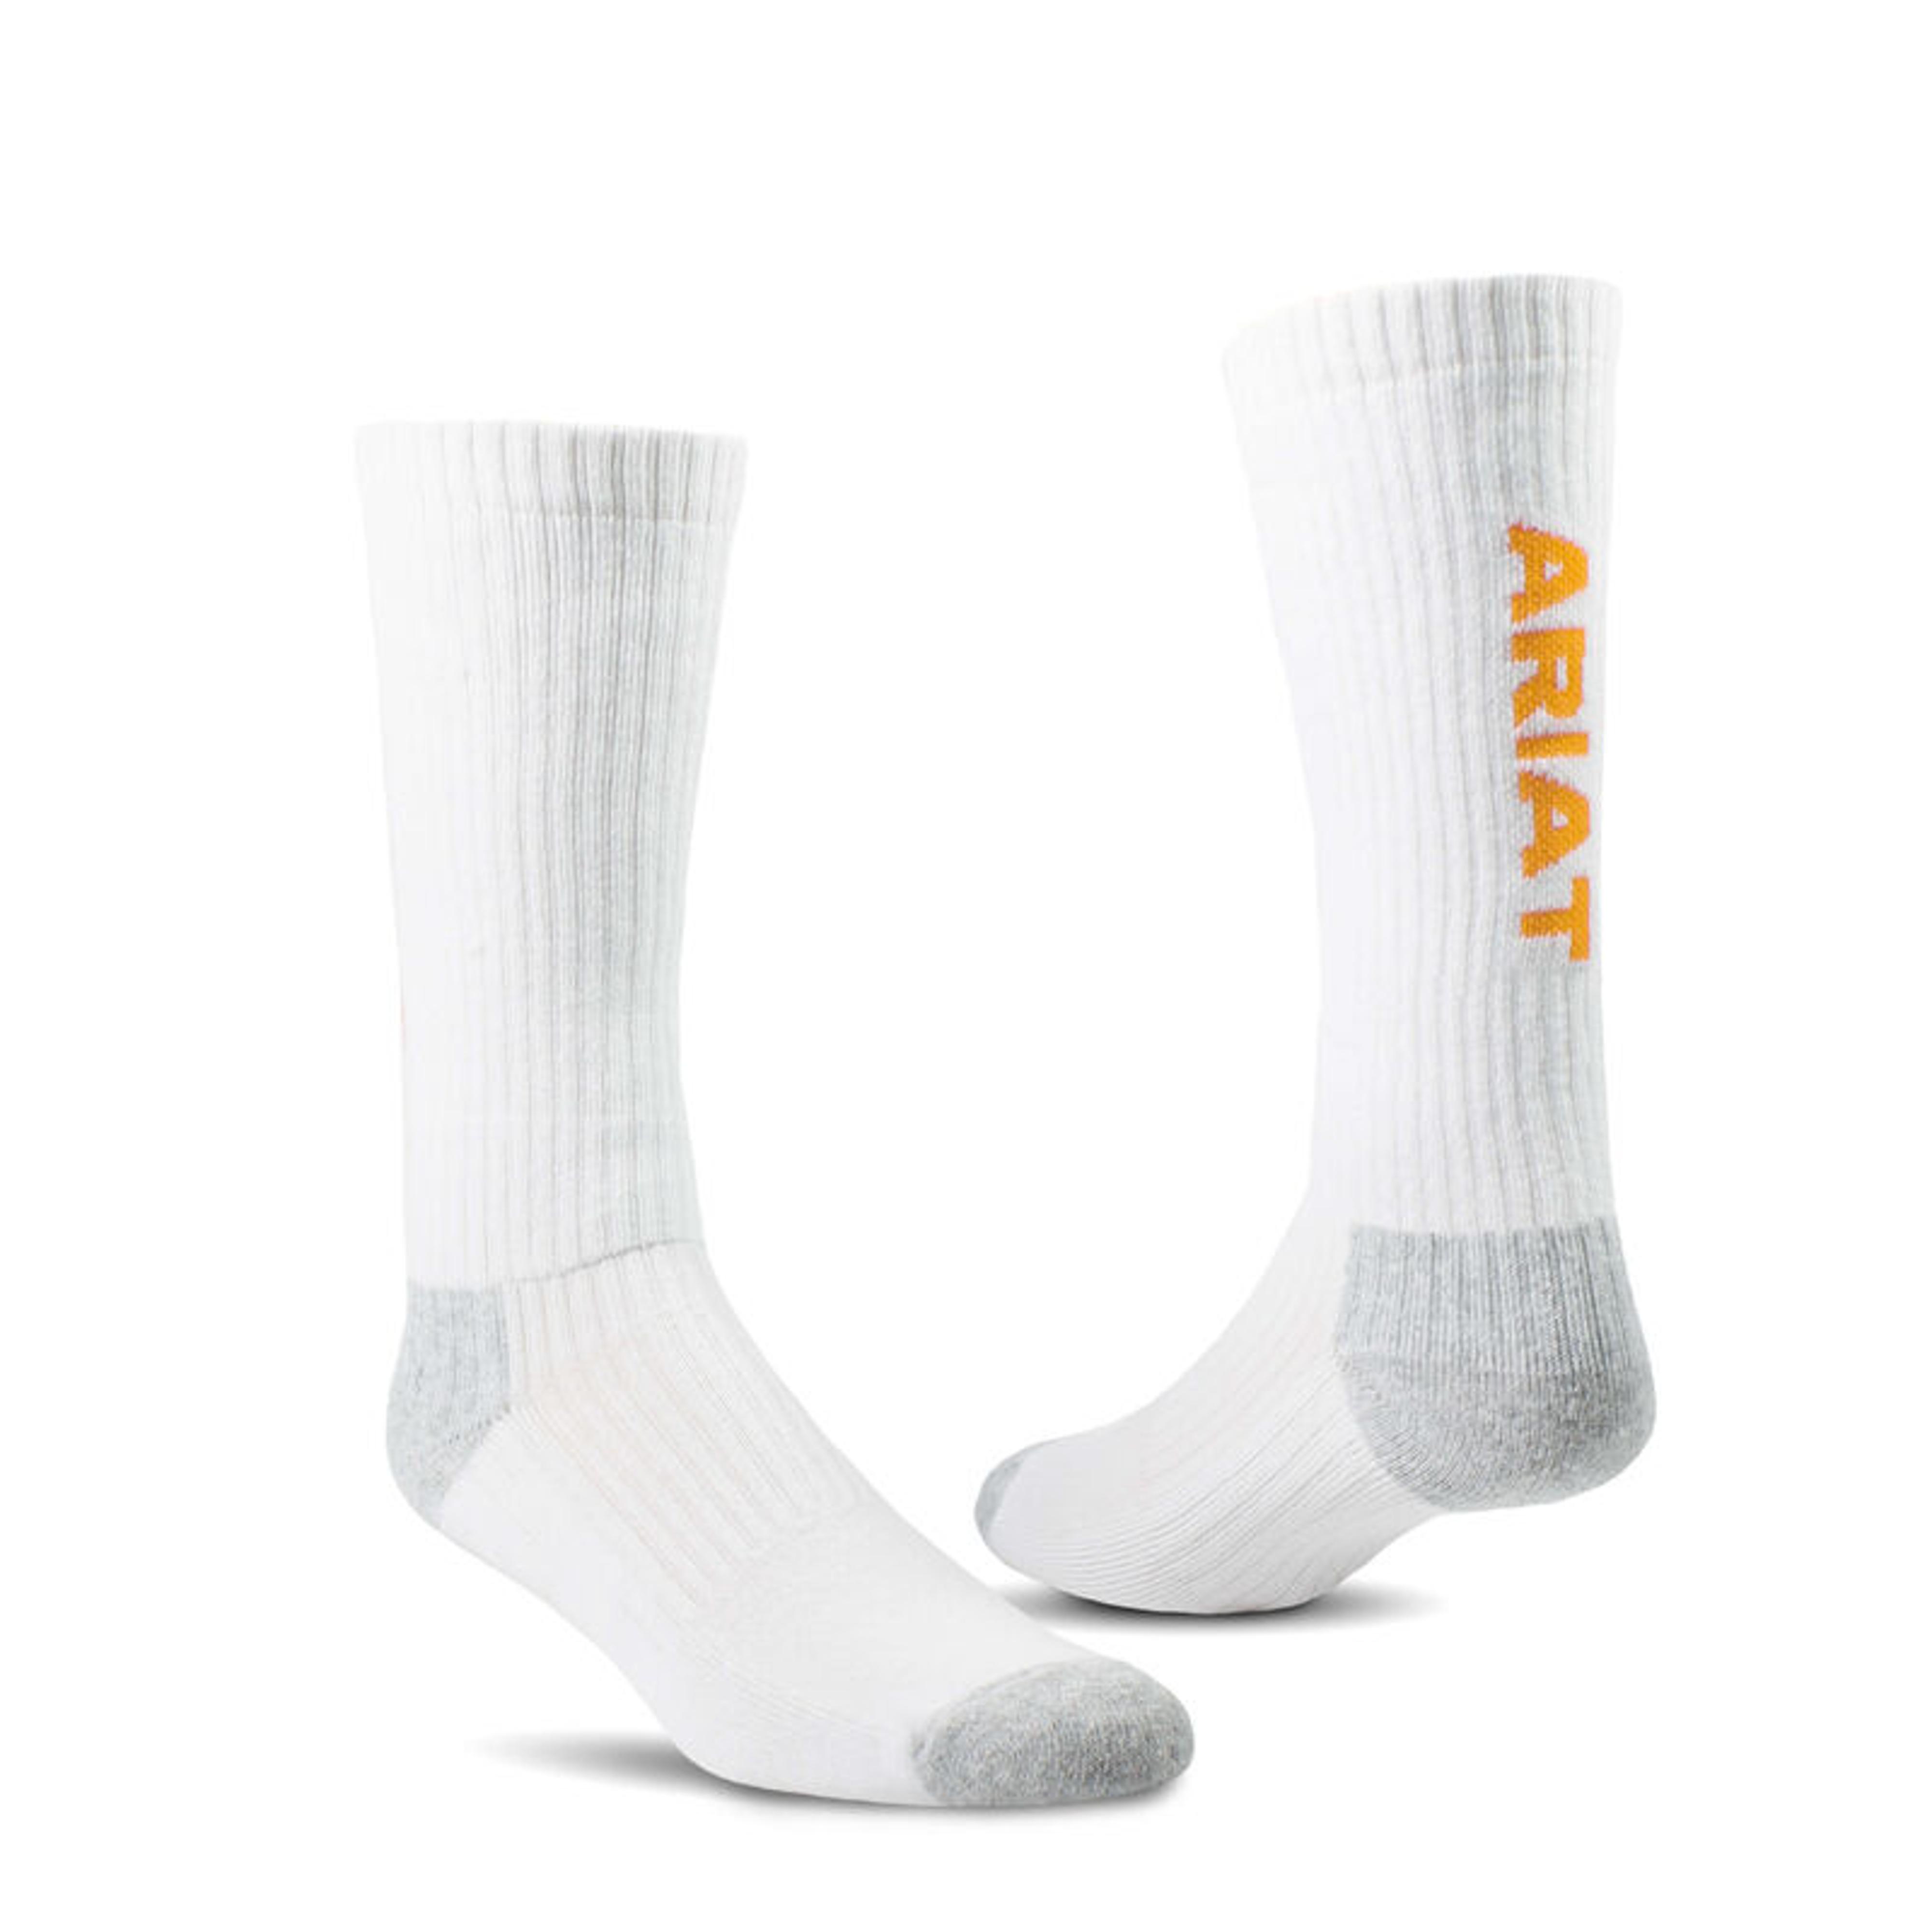  3- Pack Cotton Mid Calf